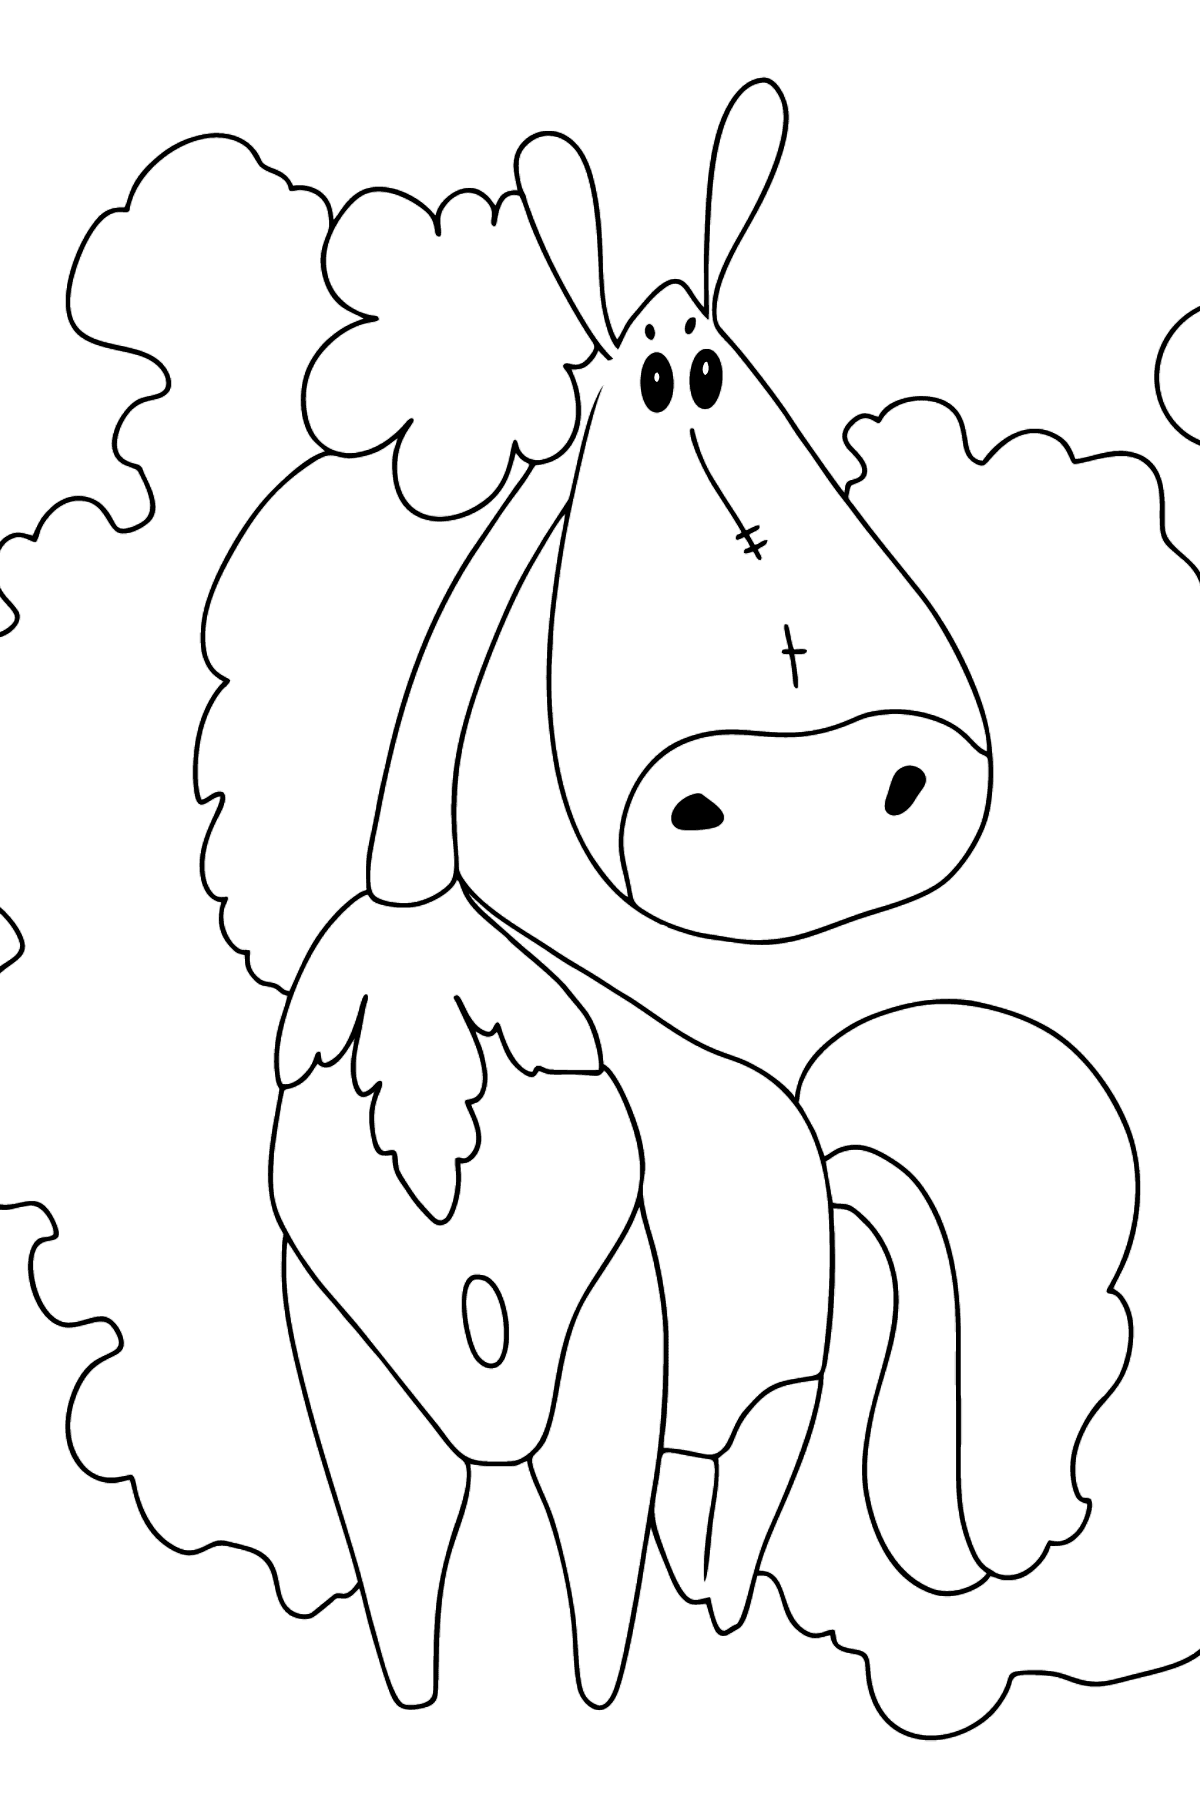 Coloring page a horse fashionista - Coloring Pages for Kids